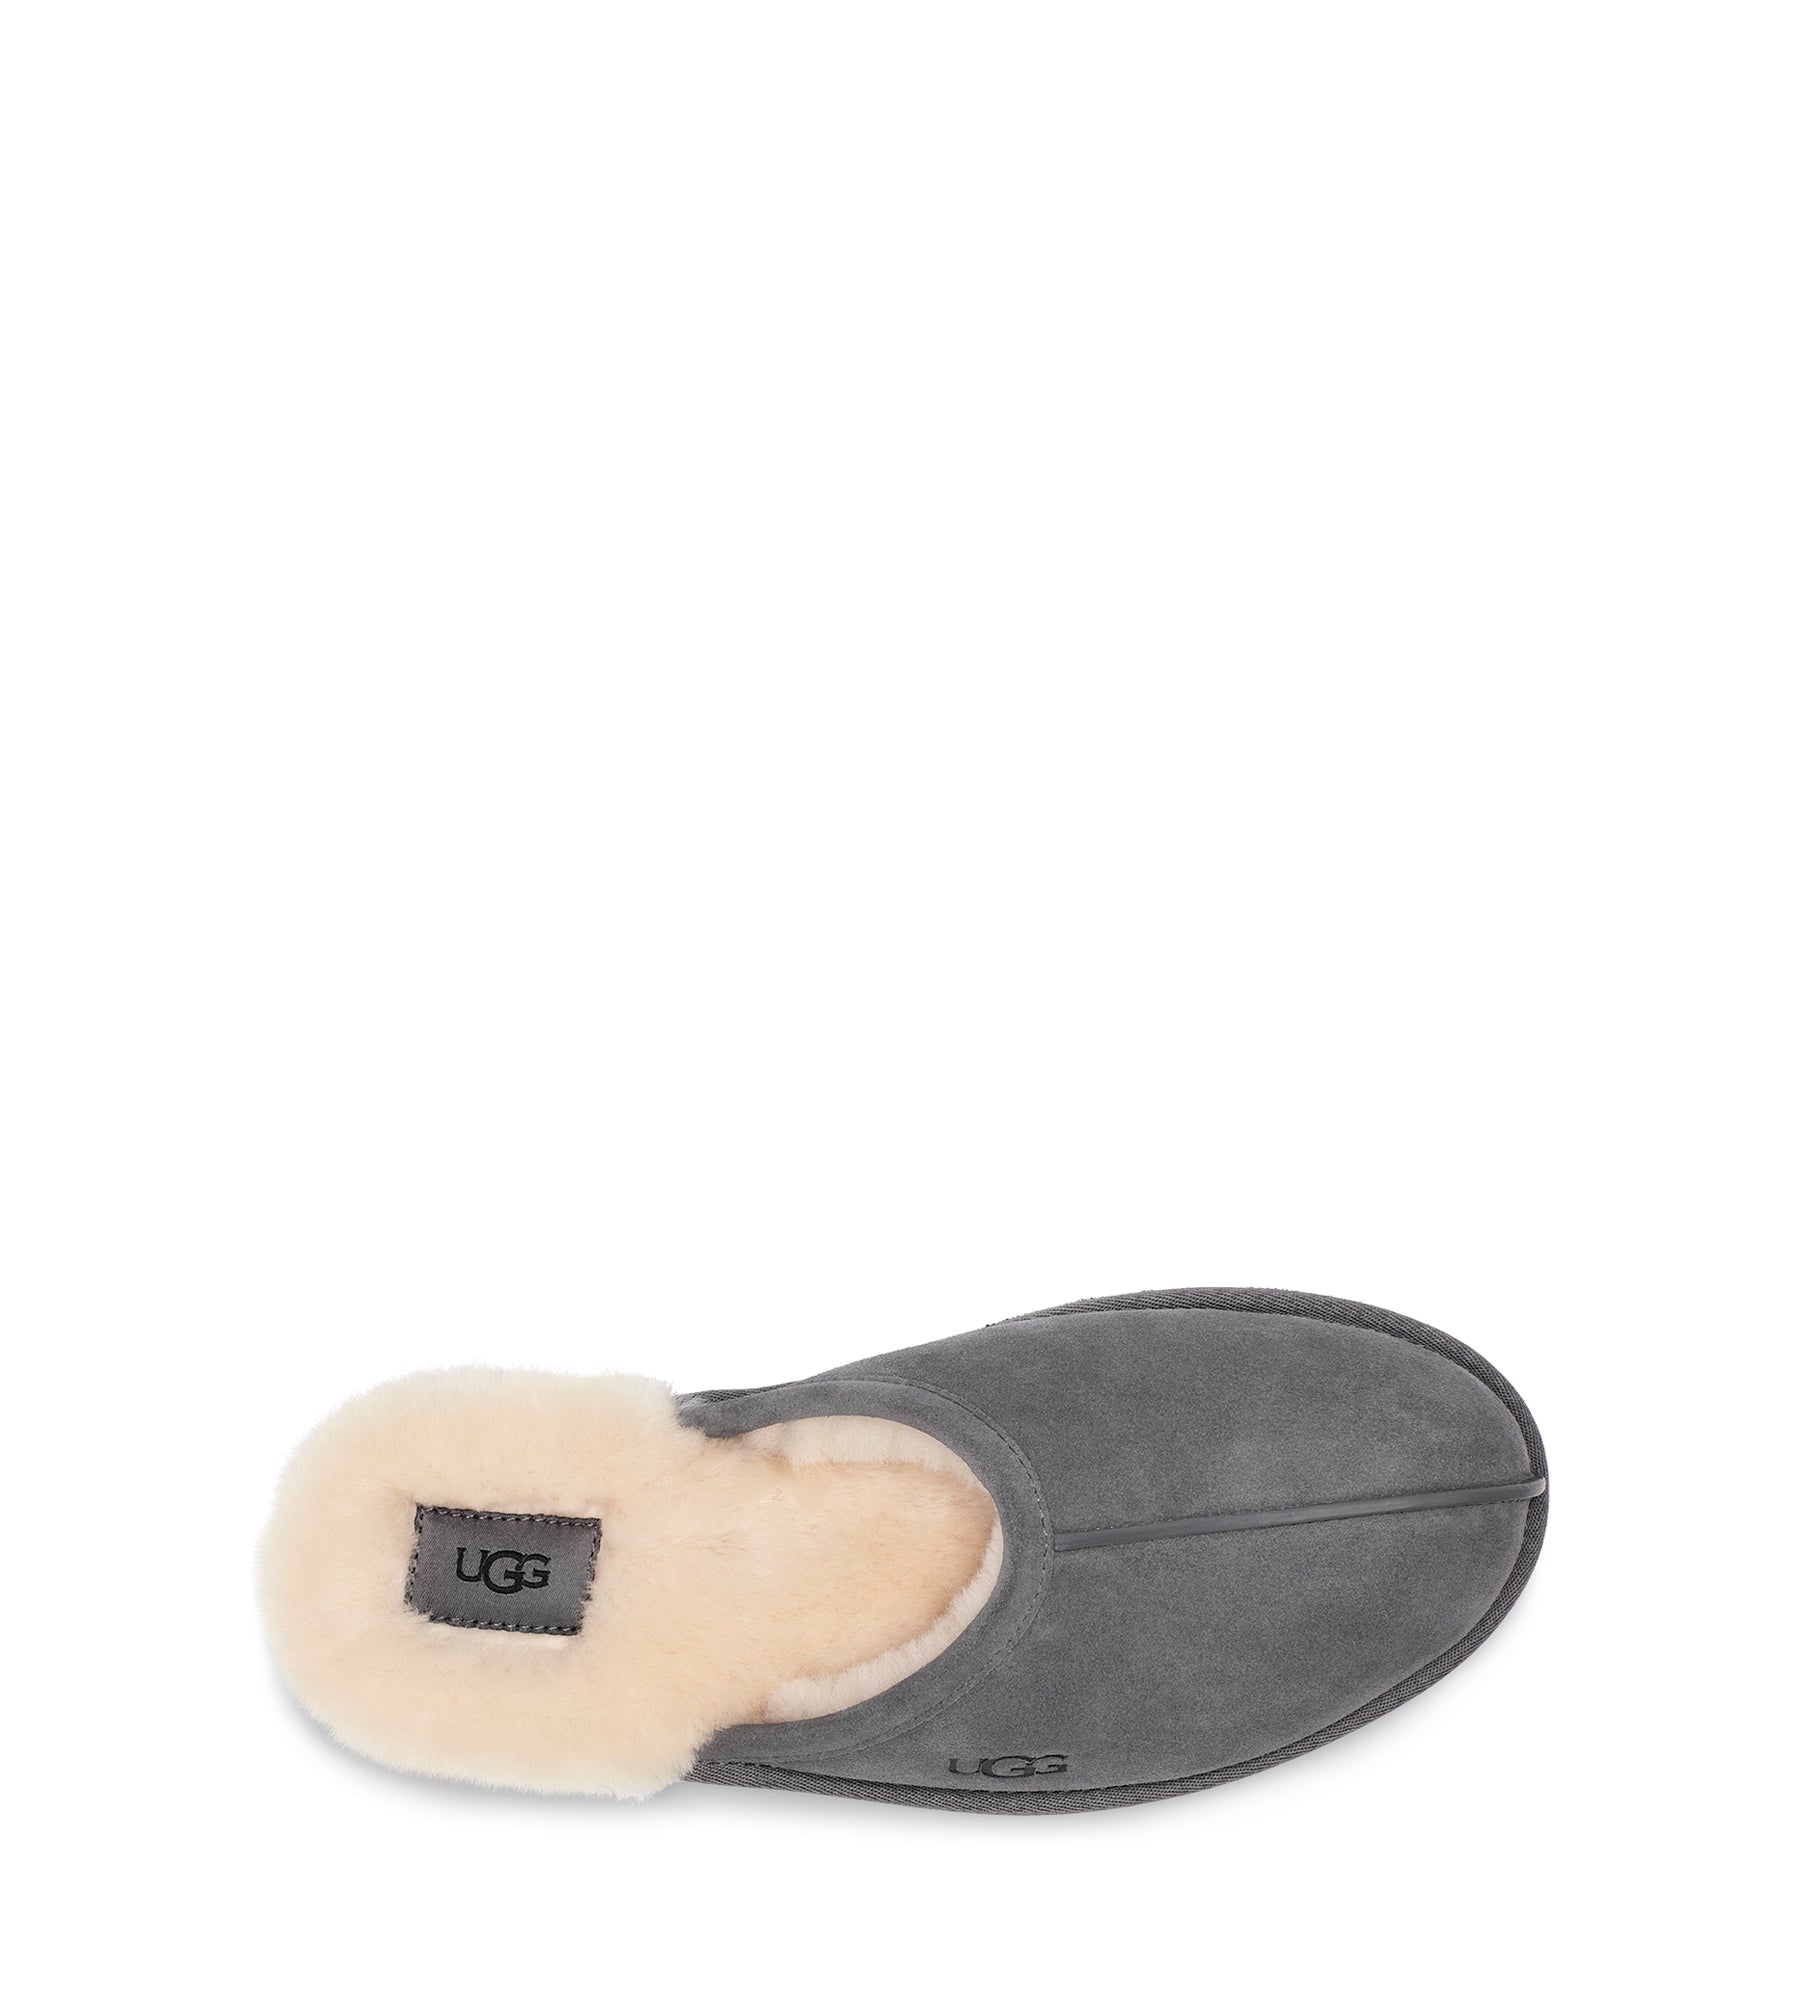 The Men's Scuff from Ugg is our favorite house slipper - made for weekends and nights in. The quick highlights are the soft wool lining and an easy slip-on shape. With its thin rubber sole, the Scuff is best worn indoors. We recommend with bare feet to experience the warm, temperature-regulating, and moisture-wicking qualities of wool.